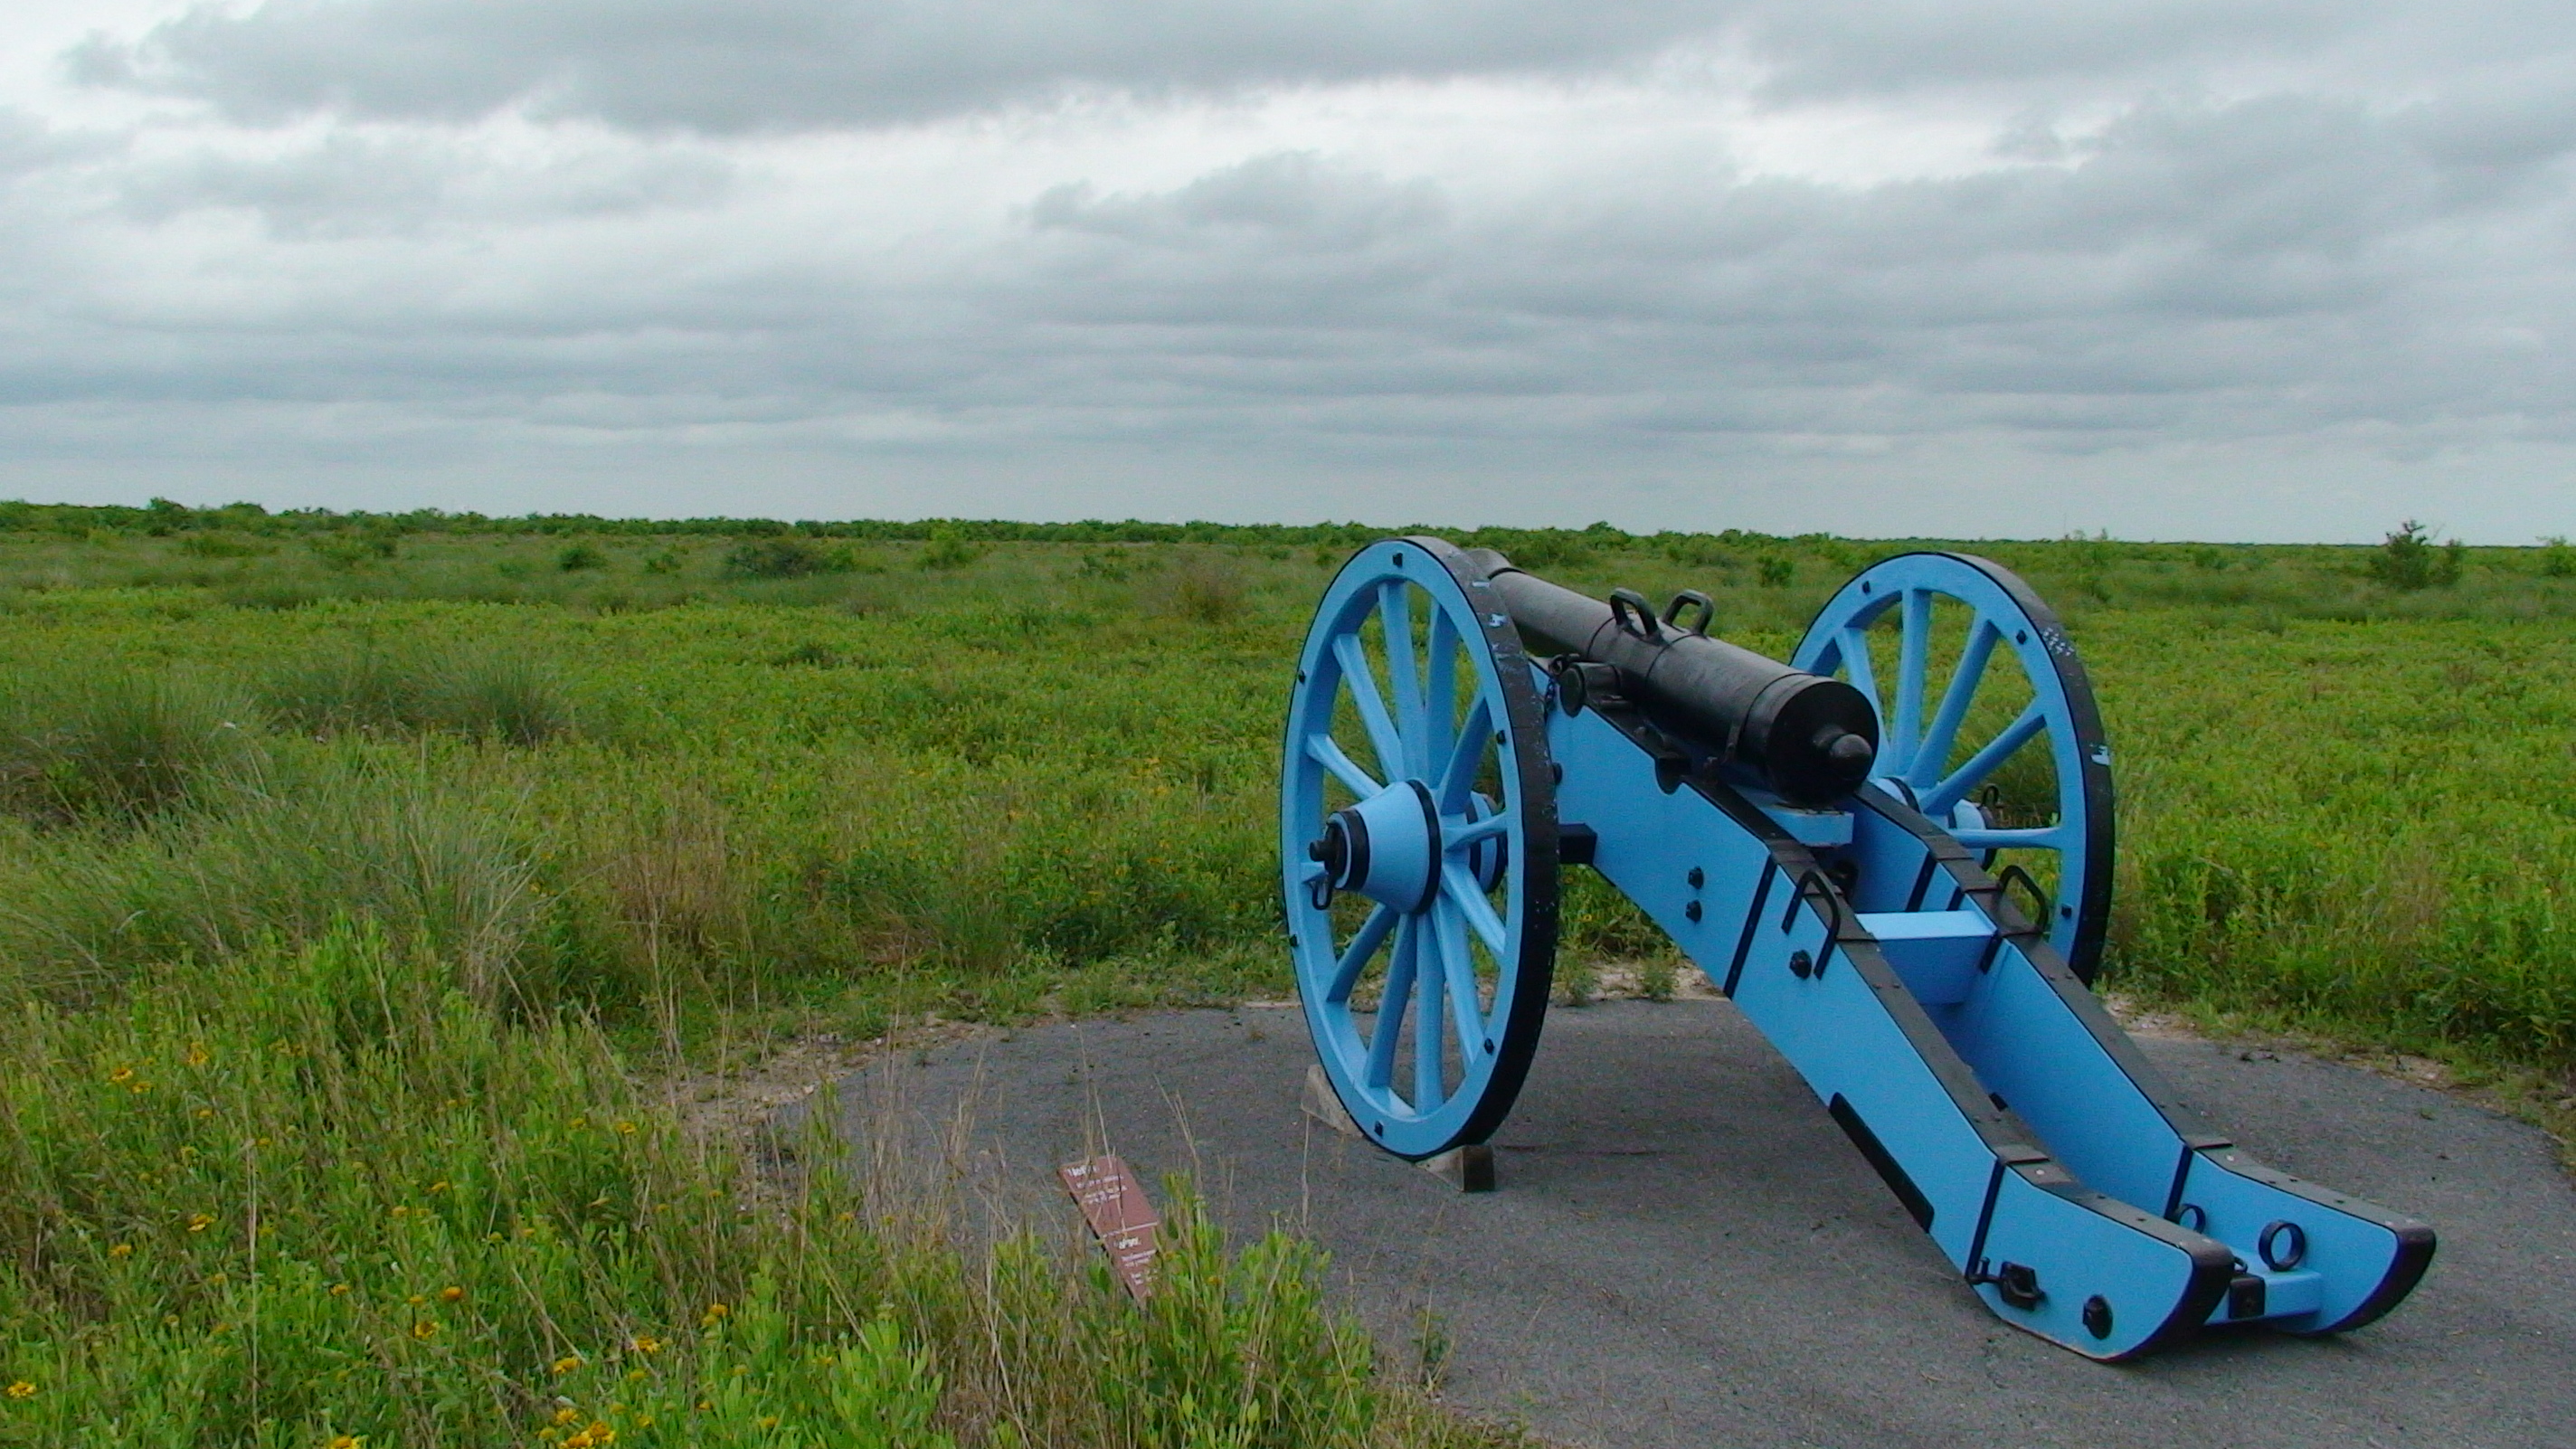 Mexican 8-pounder cannon on the battlefield.